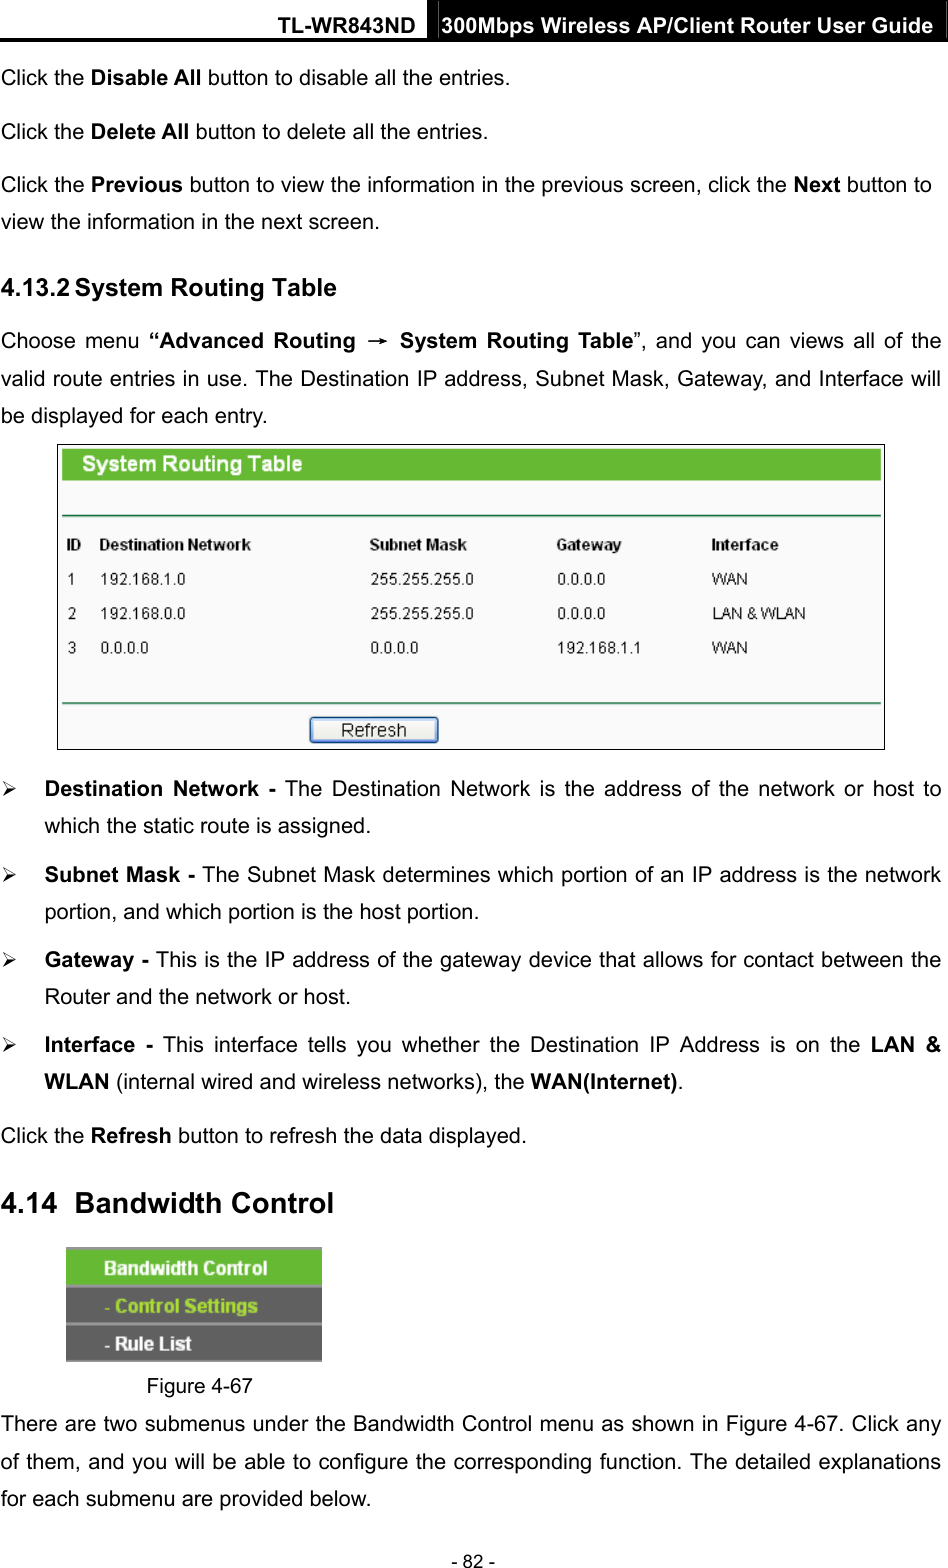 TL-WR843ND 300Mbps Wireless AP/Client Router User Guide - 82 - Click the Disable All button to disable all the entries. Click the Delete All button to delete all the entries. Click the Previous button to view the information in the previous screen, click the Next button to view the information in the next screen. 4.13.2 System Routing Table Choose menu “Advanced Routing → System Routing Table”, and you can views all of the valid route entries in use. The Destination IP address, Subnet Mask, Gateway, and Interface will be displayed for each entry.   Destination Network - The Destination Network is the address of the network or host to which the static route is assigned.    Subnet Mask - The Subnet Mask determines which portion of an IP address is the network portion, and which portion is the host portion.    Gateway - This is the IP address of the gateway device that allows for contact between the Router and the network or host.    Interface - This interface tells you whether the Destination IP Address is on the LAN &amp; WLAN (internal wired and wireless networks), the WAN(Internet).  Click the Refresh button to refresh the data displayed. 4.14   Bandwidth  Control  Figure 4-67 There are two submenus under the Bandwidth Control menu as shown in Figure 4-67. Click any of them, and you will be able to configure the corresponding function. The detailed explanations for each submenu are provided below. 